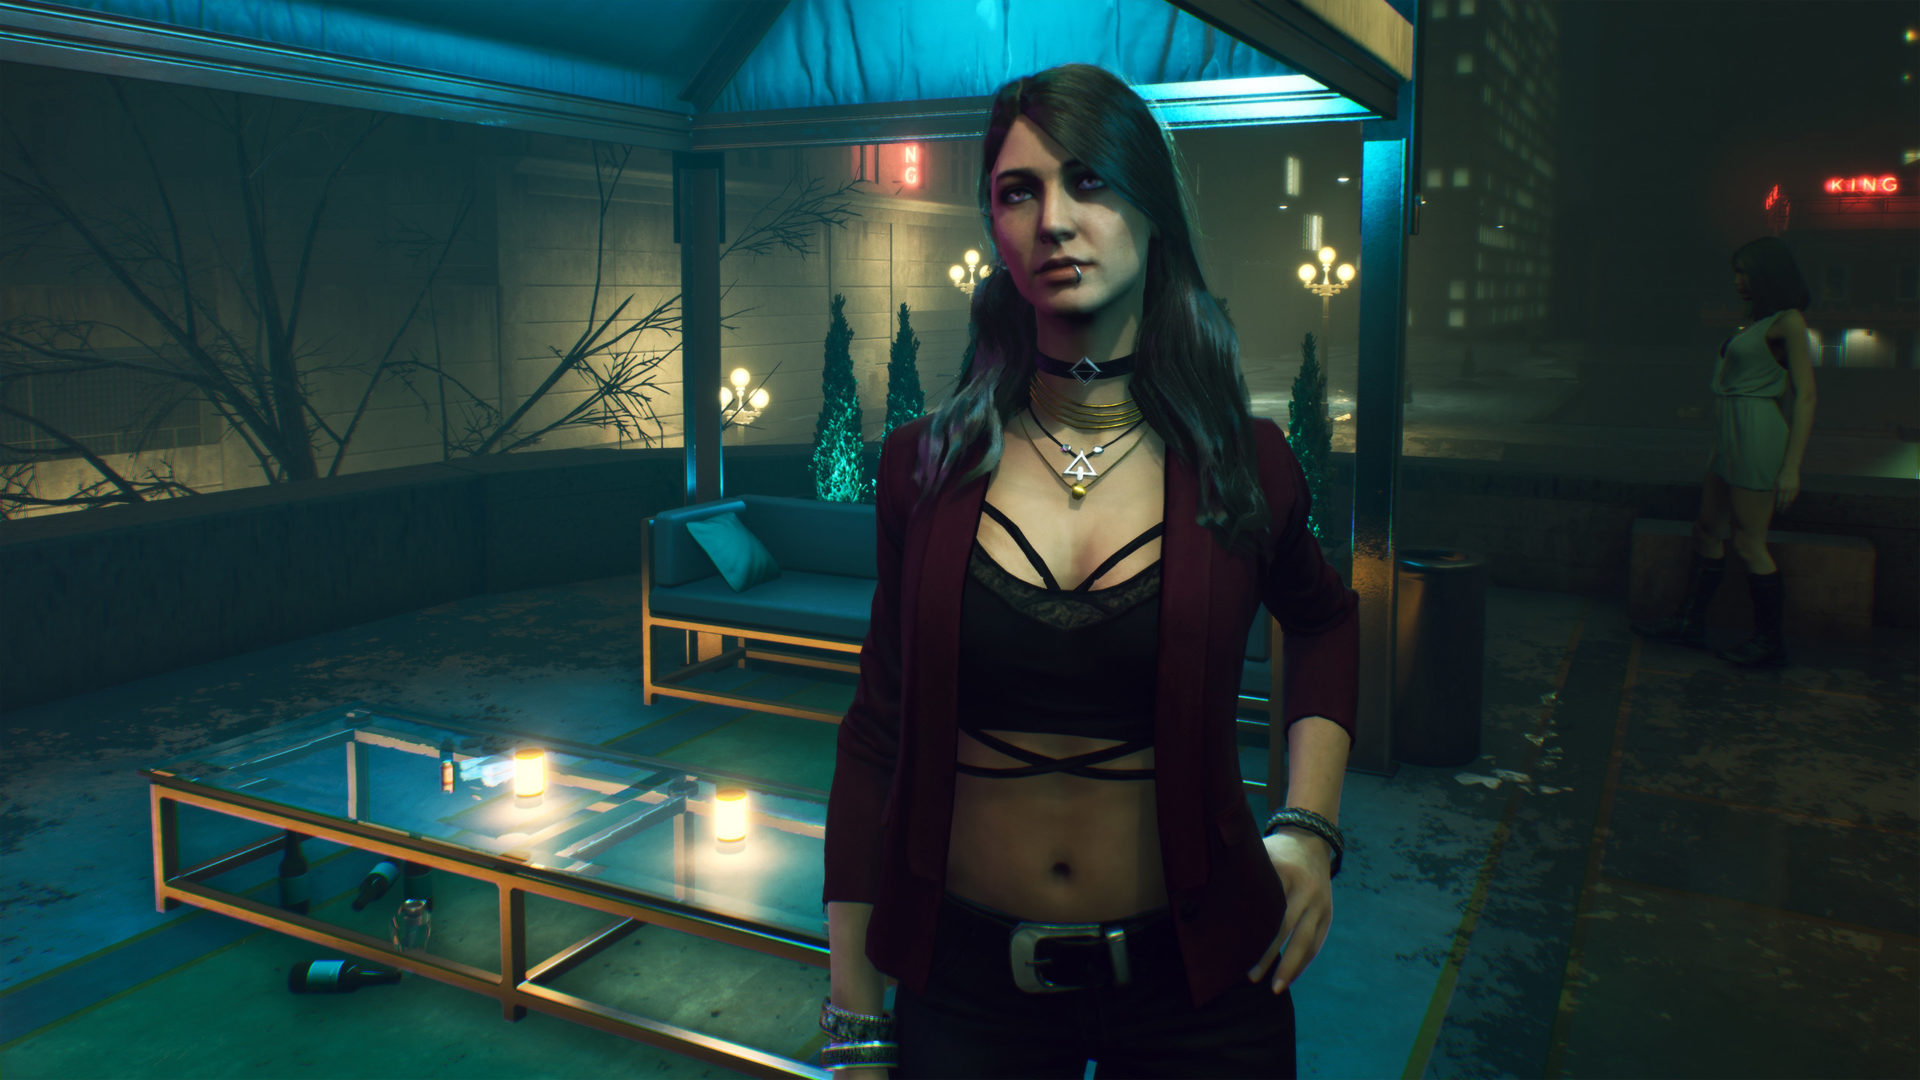 Vampire: The Masquerade – Bloodlines 2 Wallpapers - PlayStation